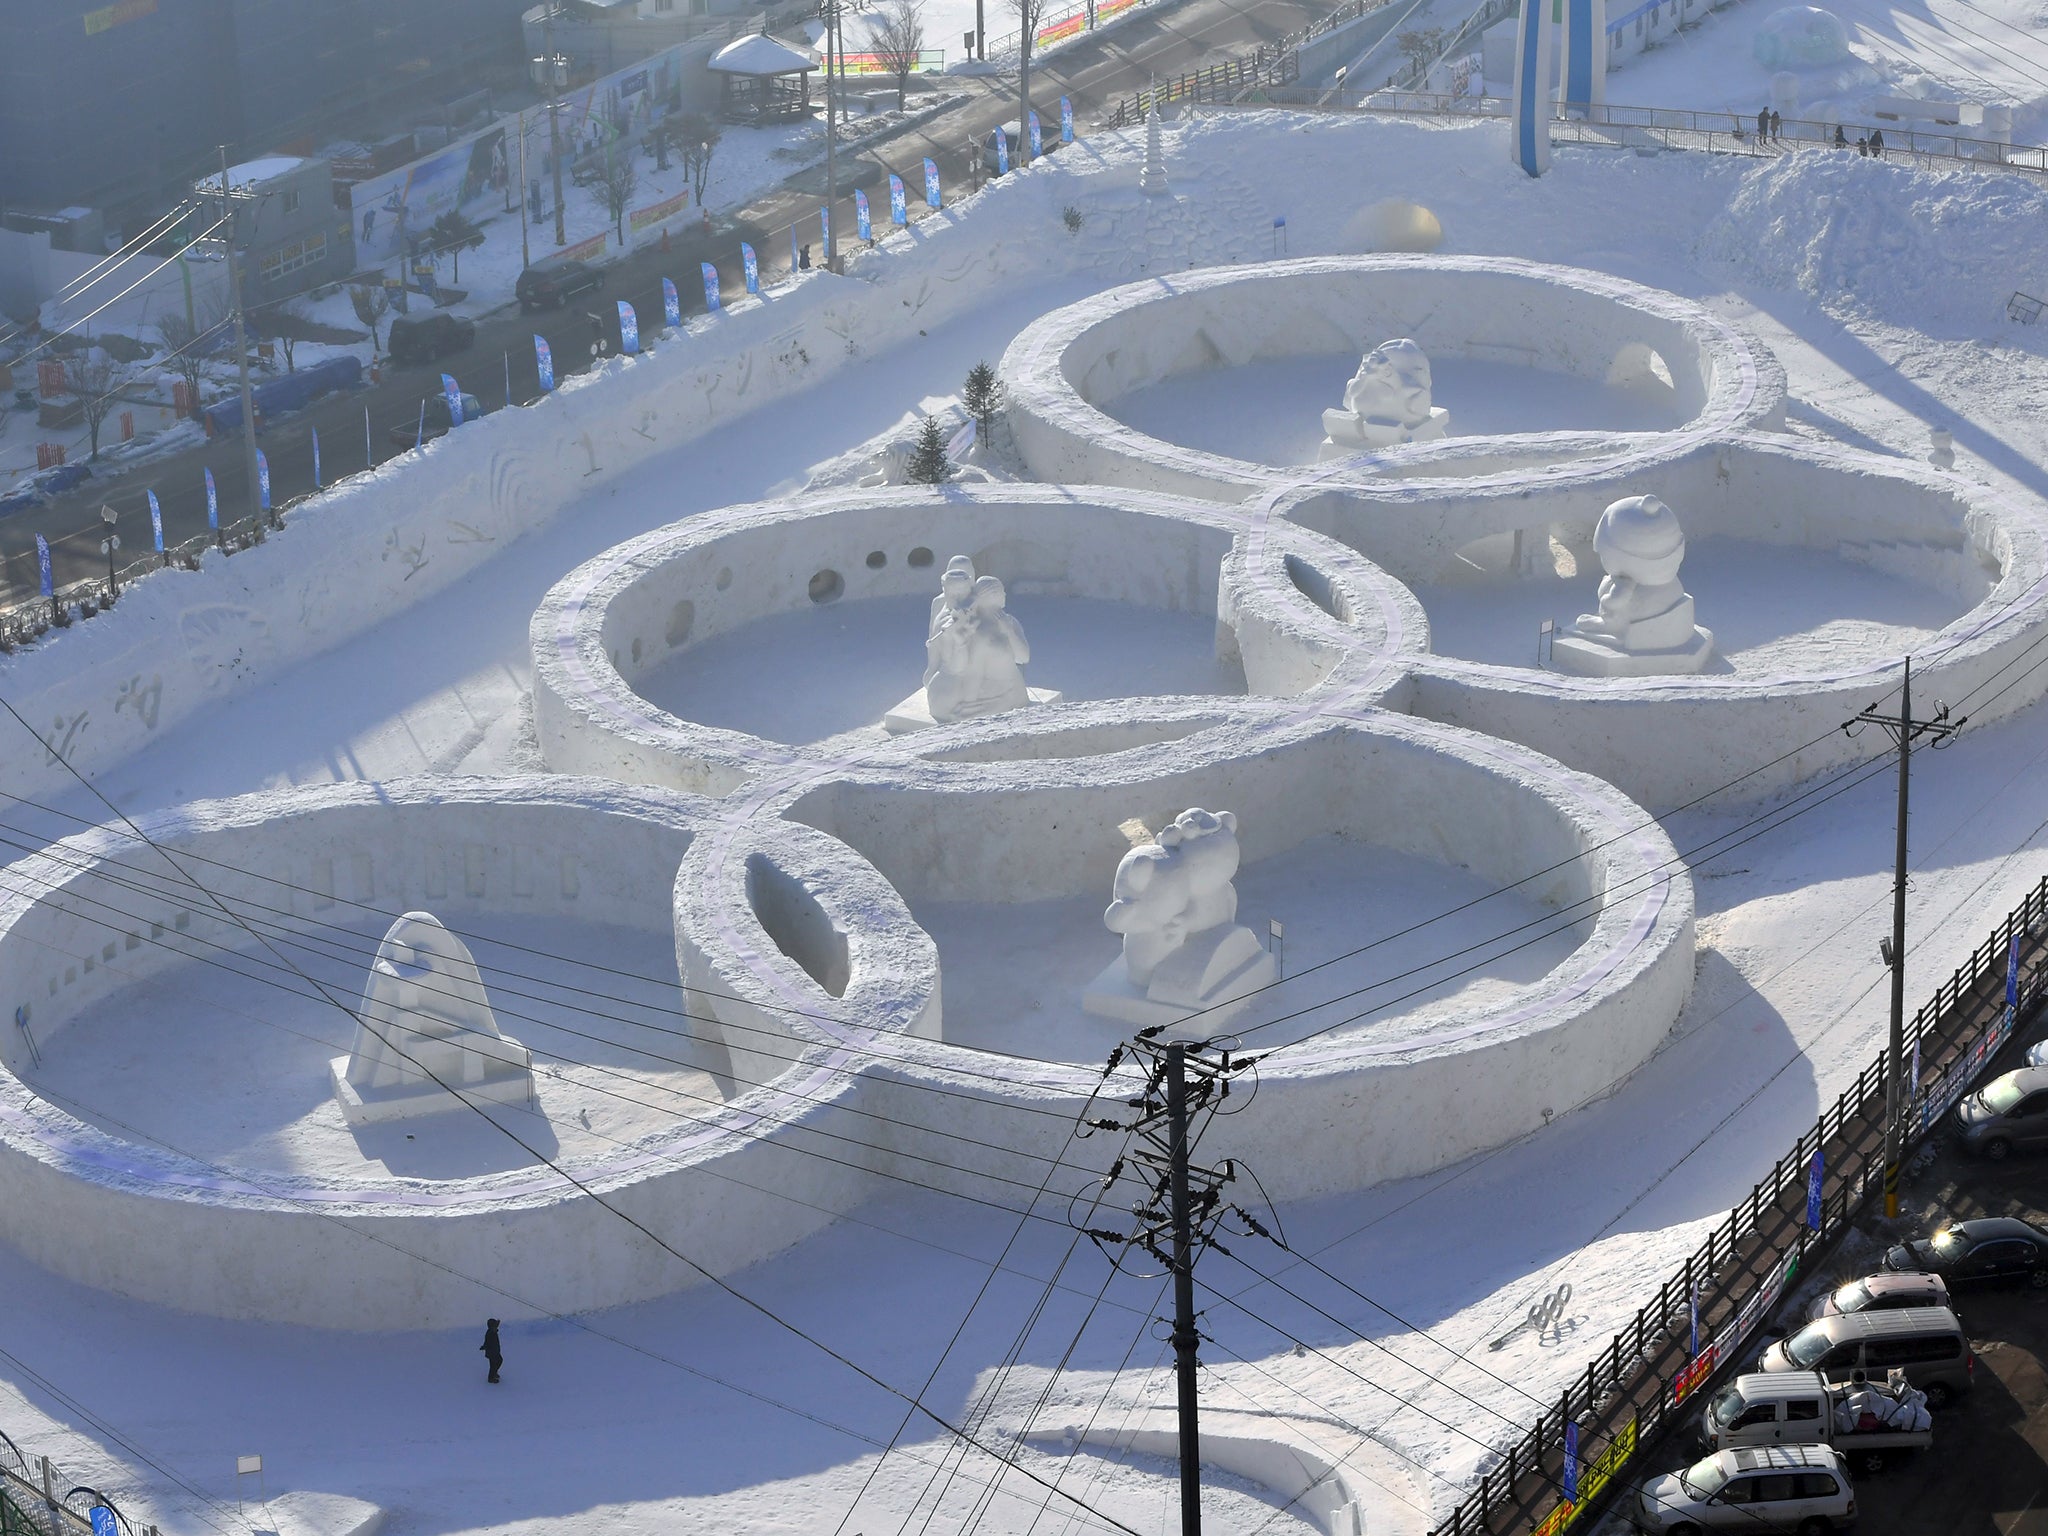 Nine of the 21 Winter Olympics host cities are unlikely to be cold enough to stage the Games within a few decades